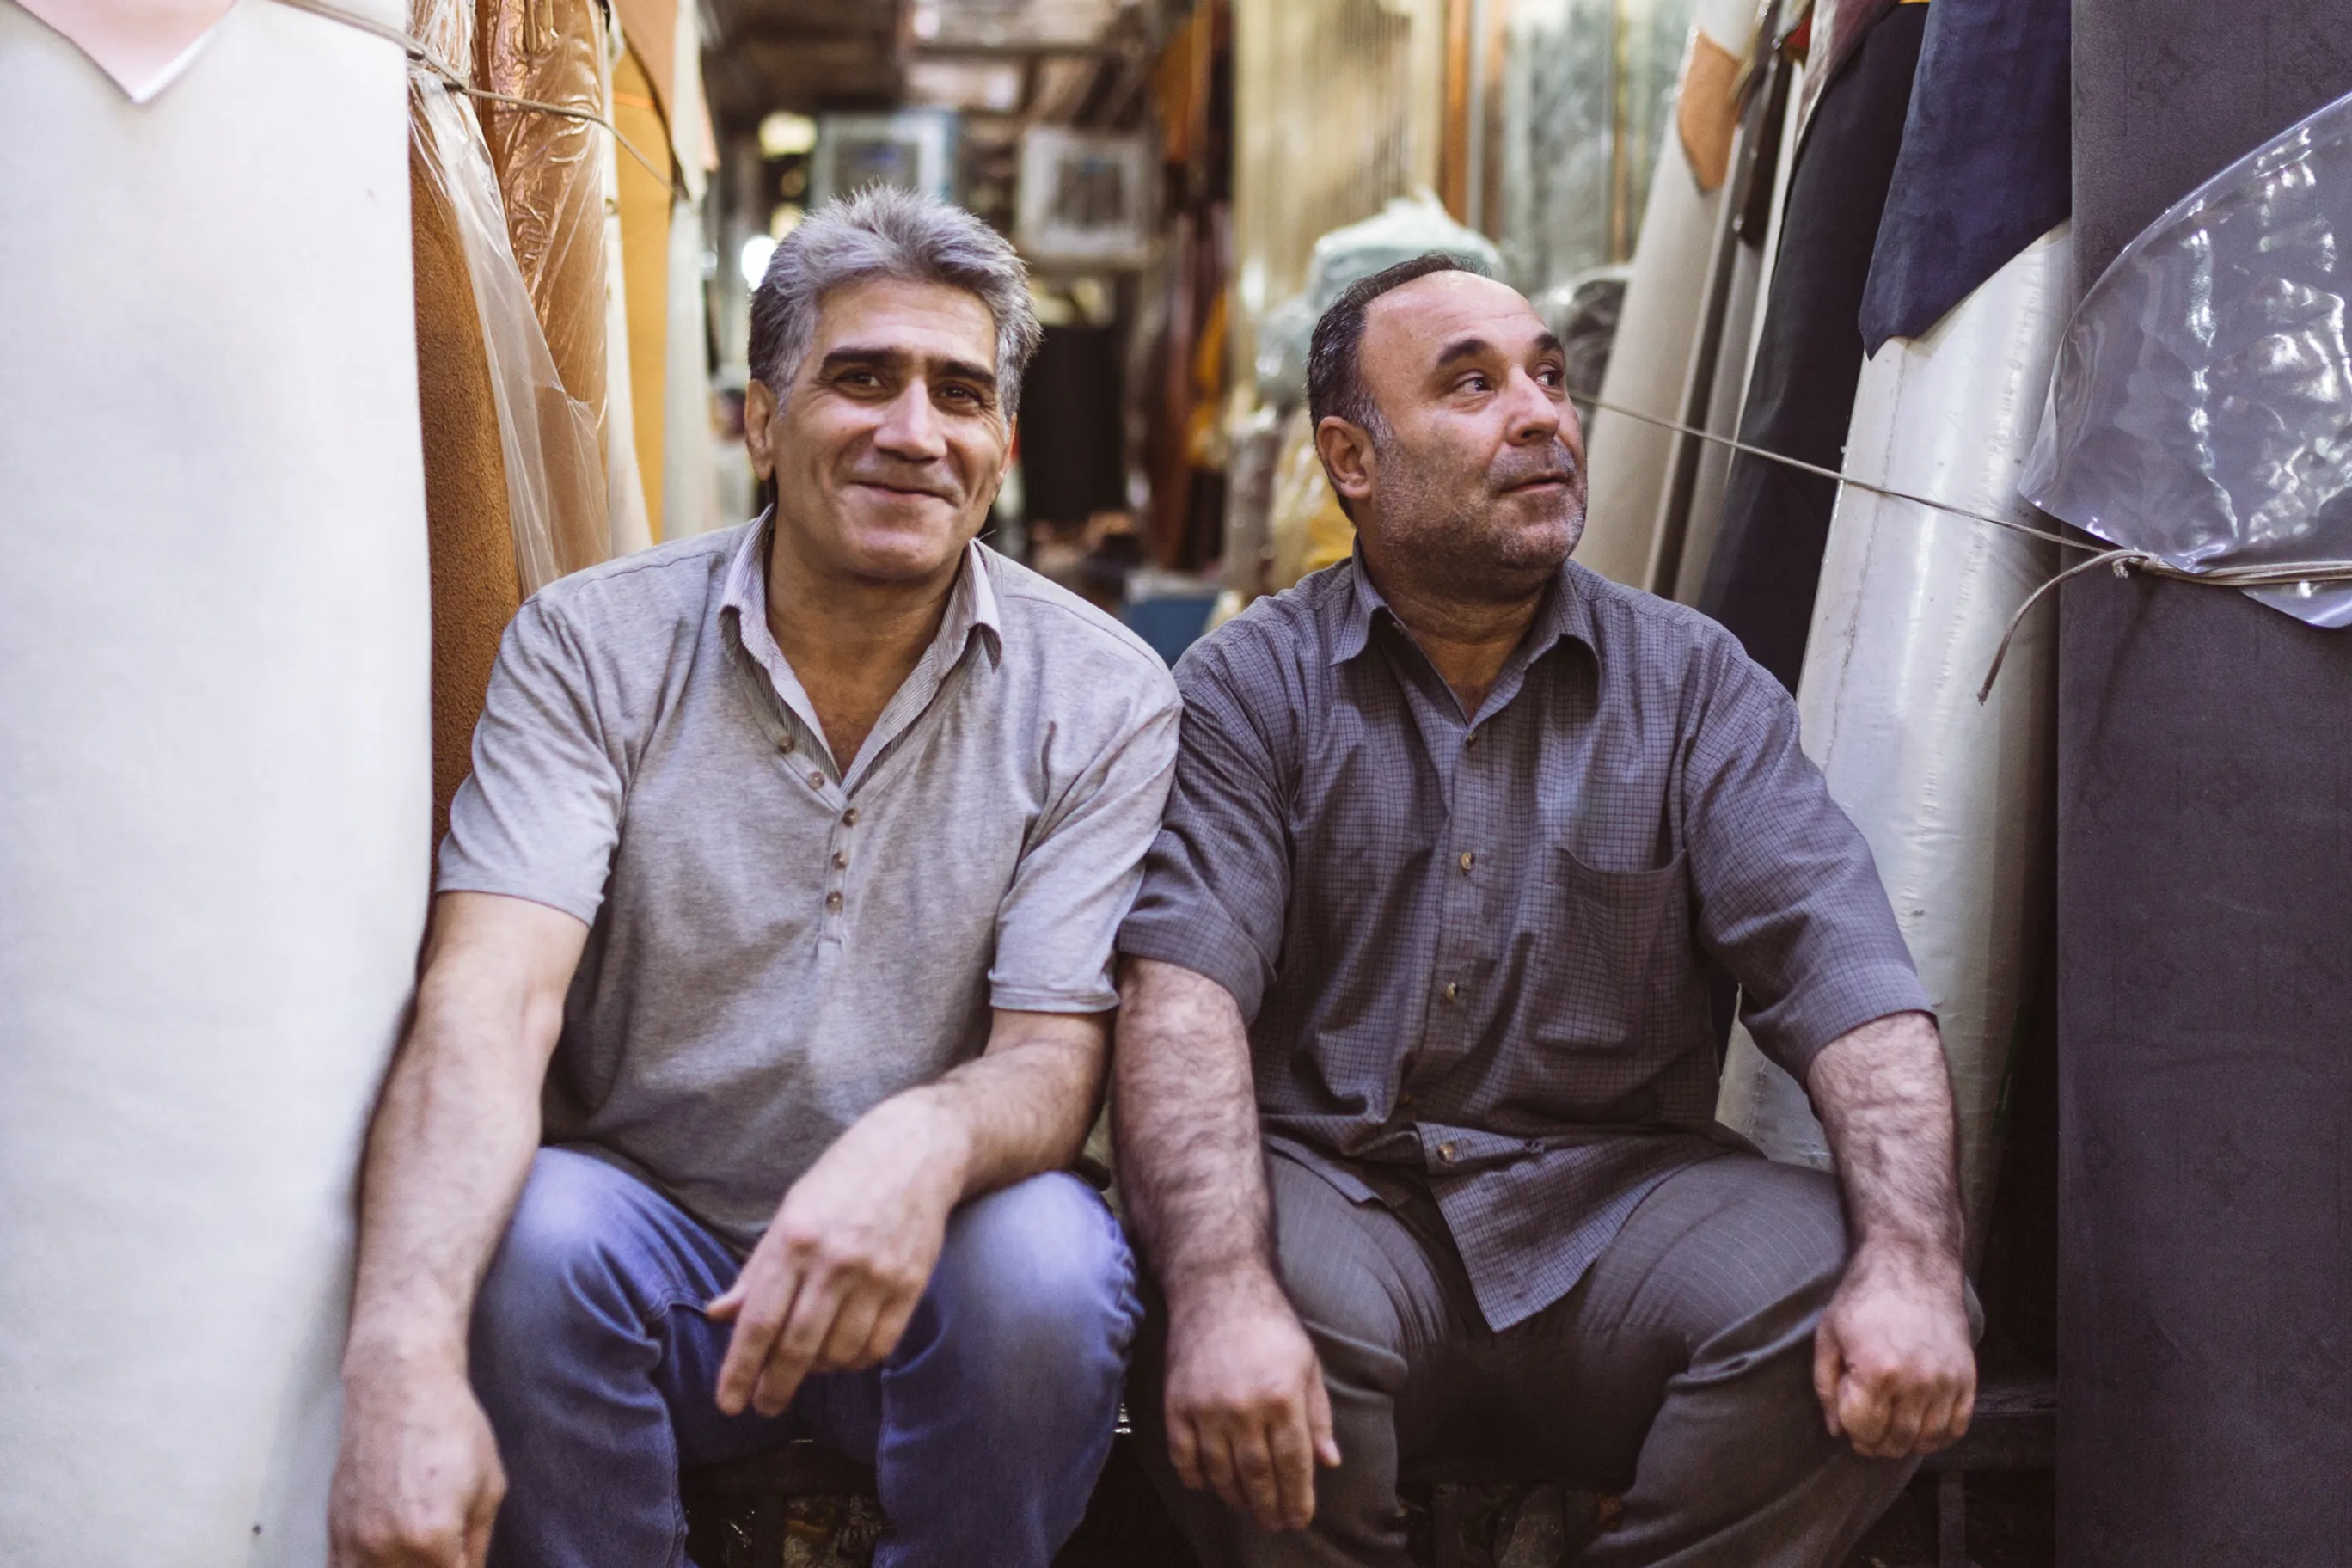 Candid photo of two Persian people at a Tehran Bazaar